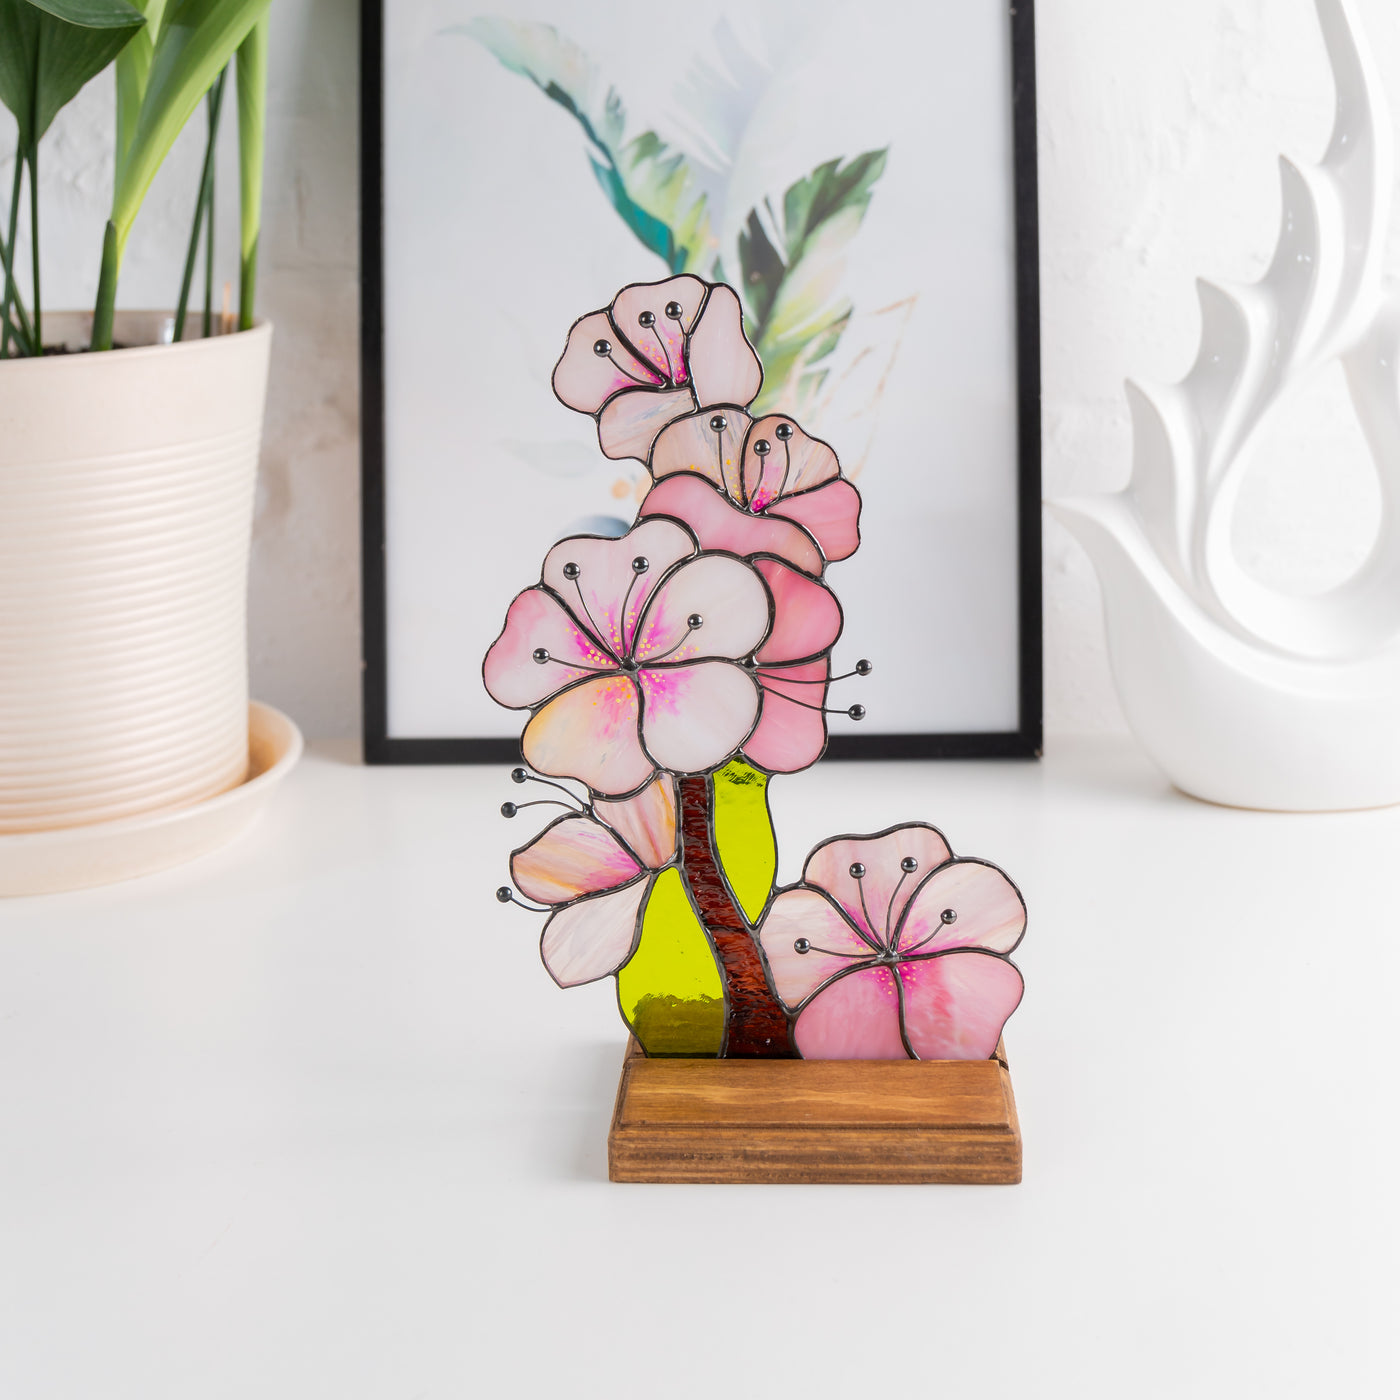 Stained glass sakura flower panel in a wooden base for table decor